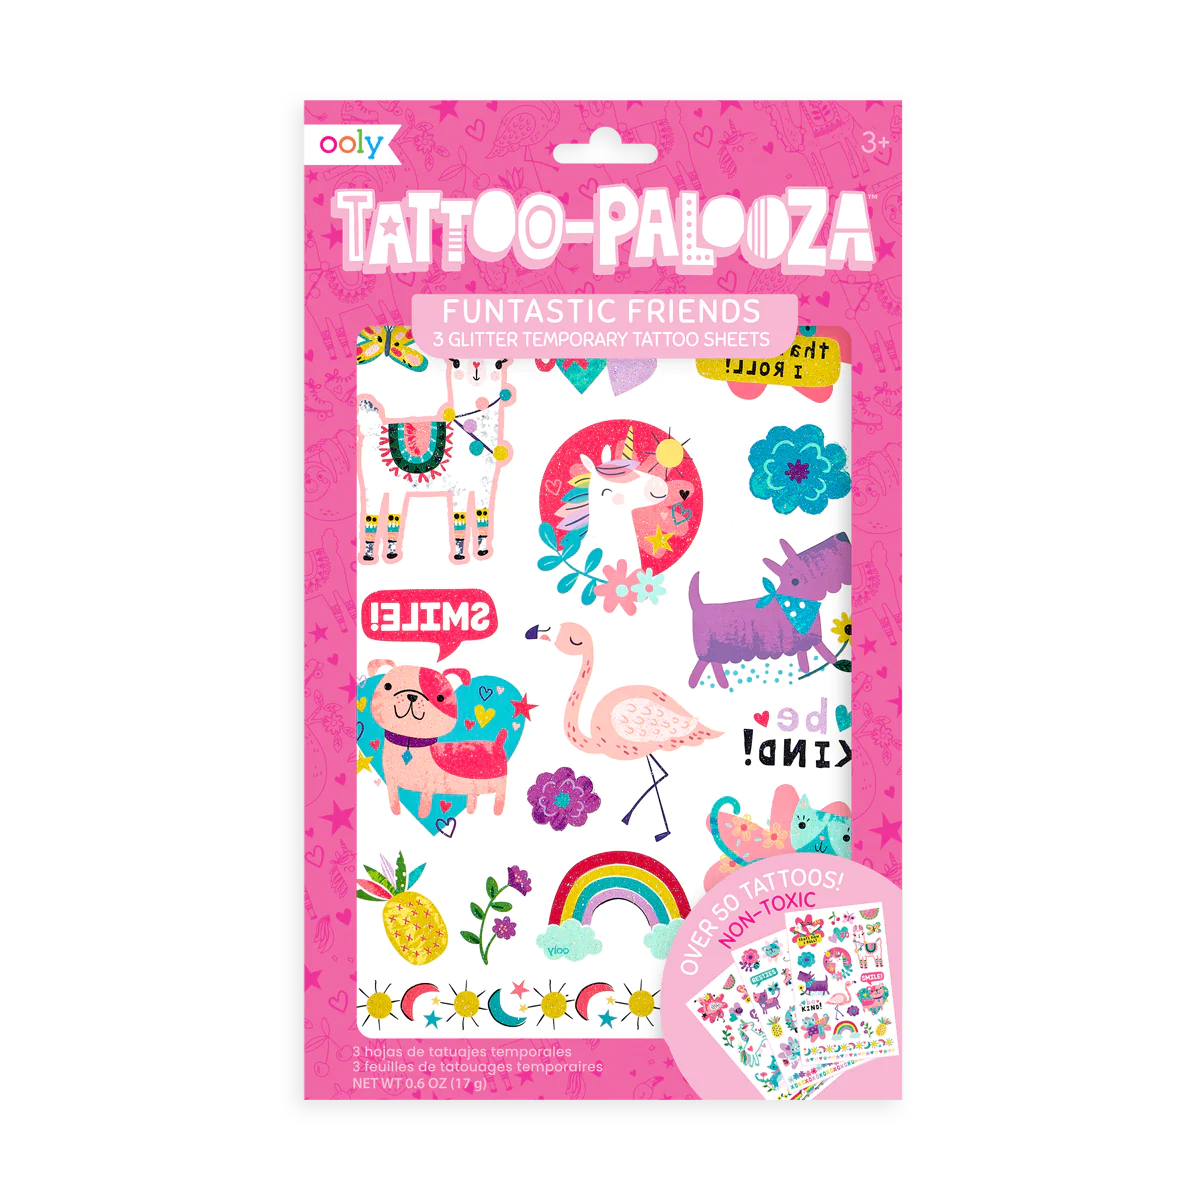 QTFHR 60 Sheets Colourful Temporary Tattoo Stickers India | Ubuy